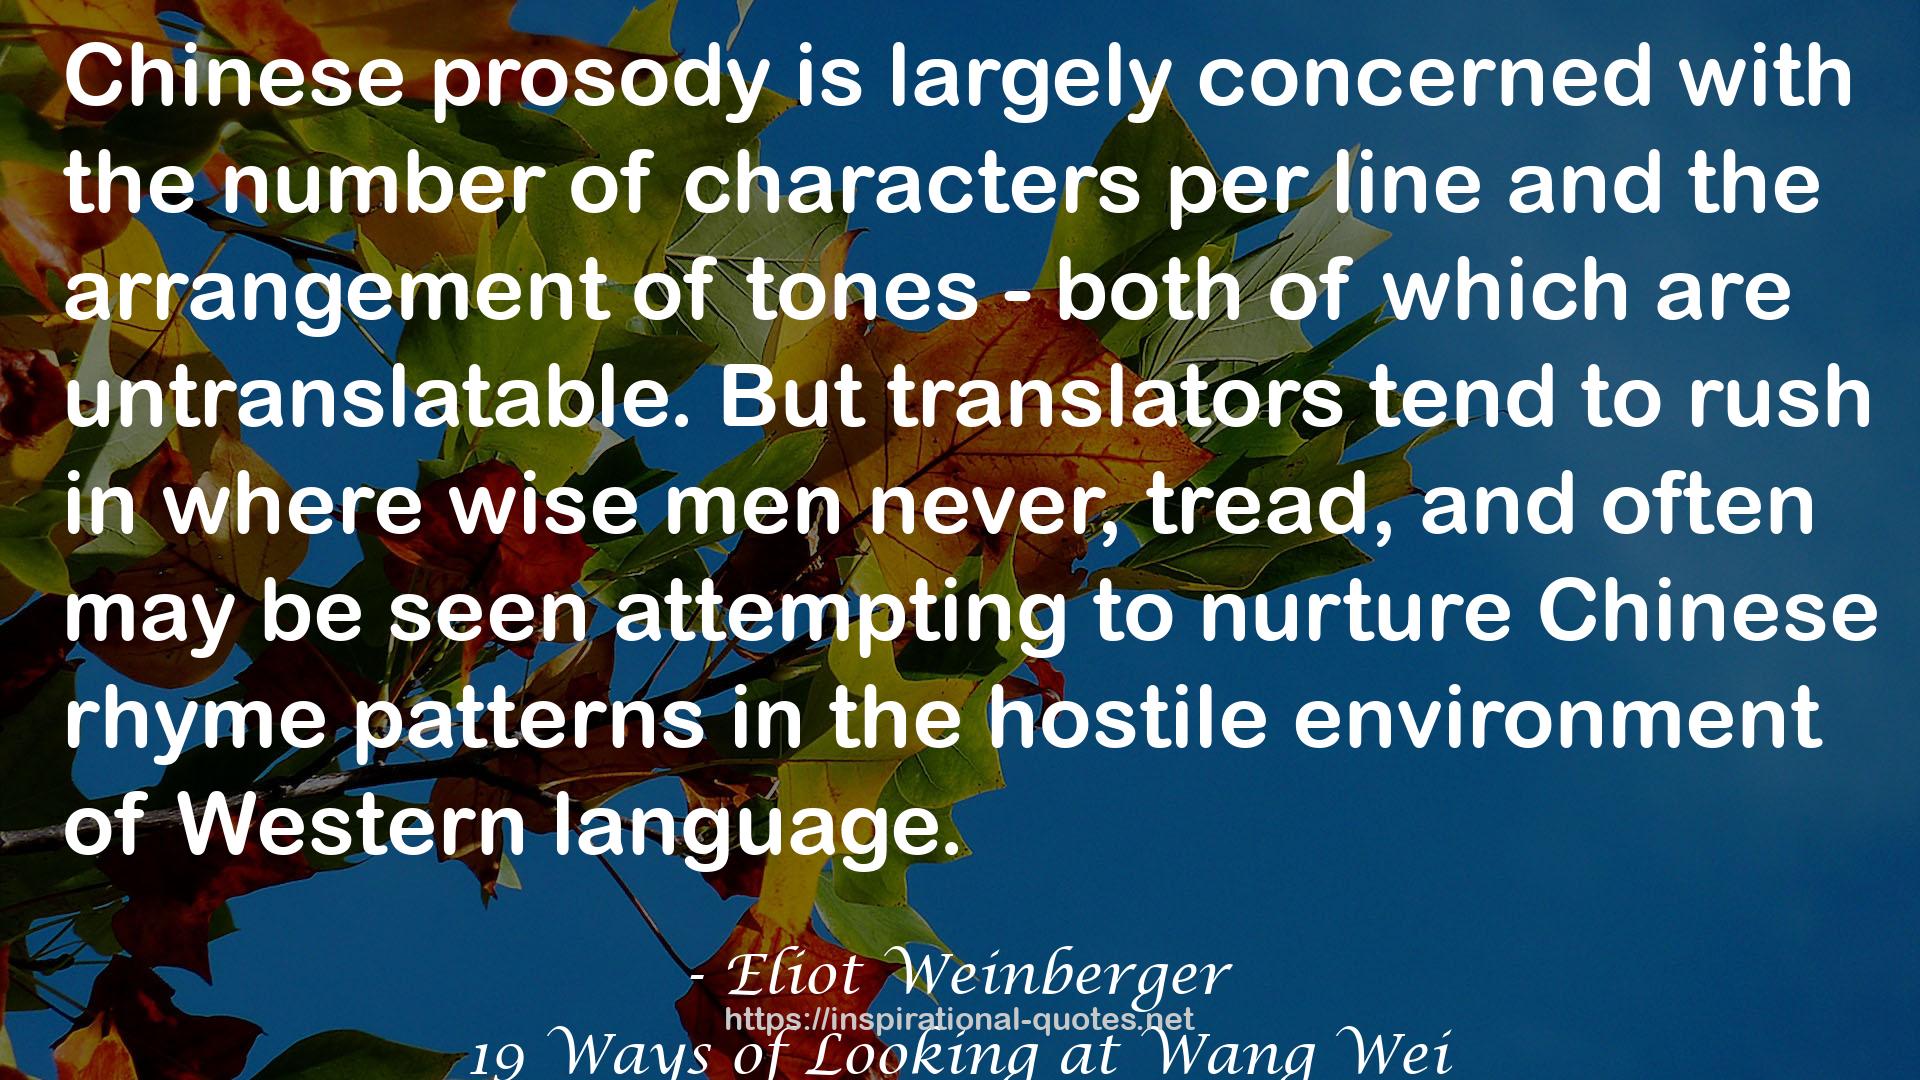 Eliot Weinberger QUOTES